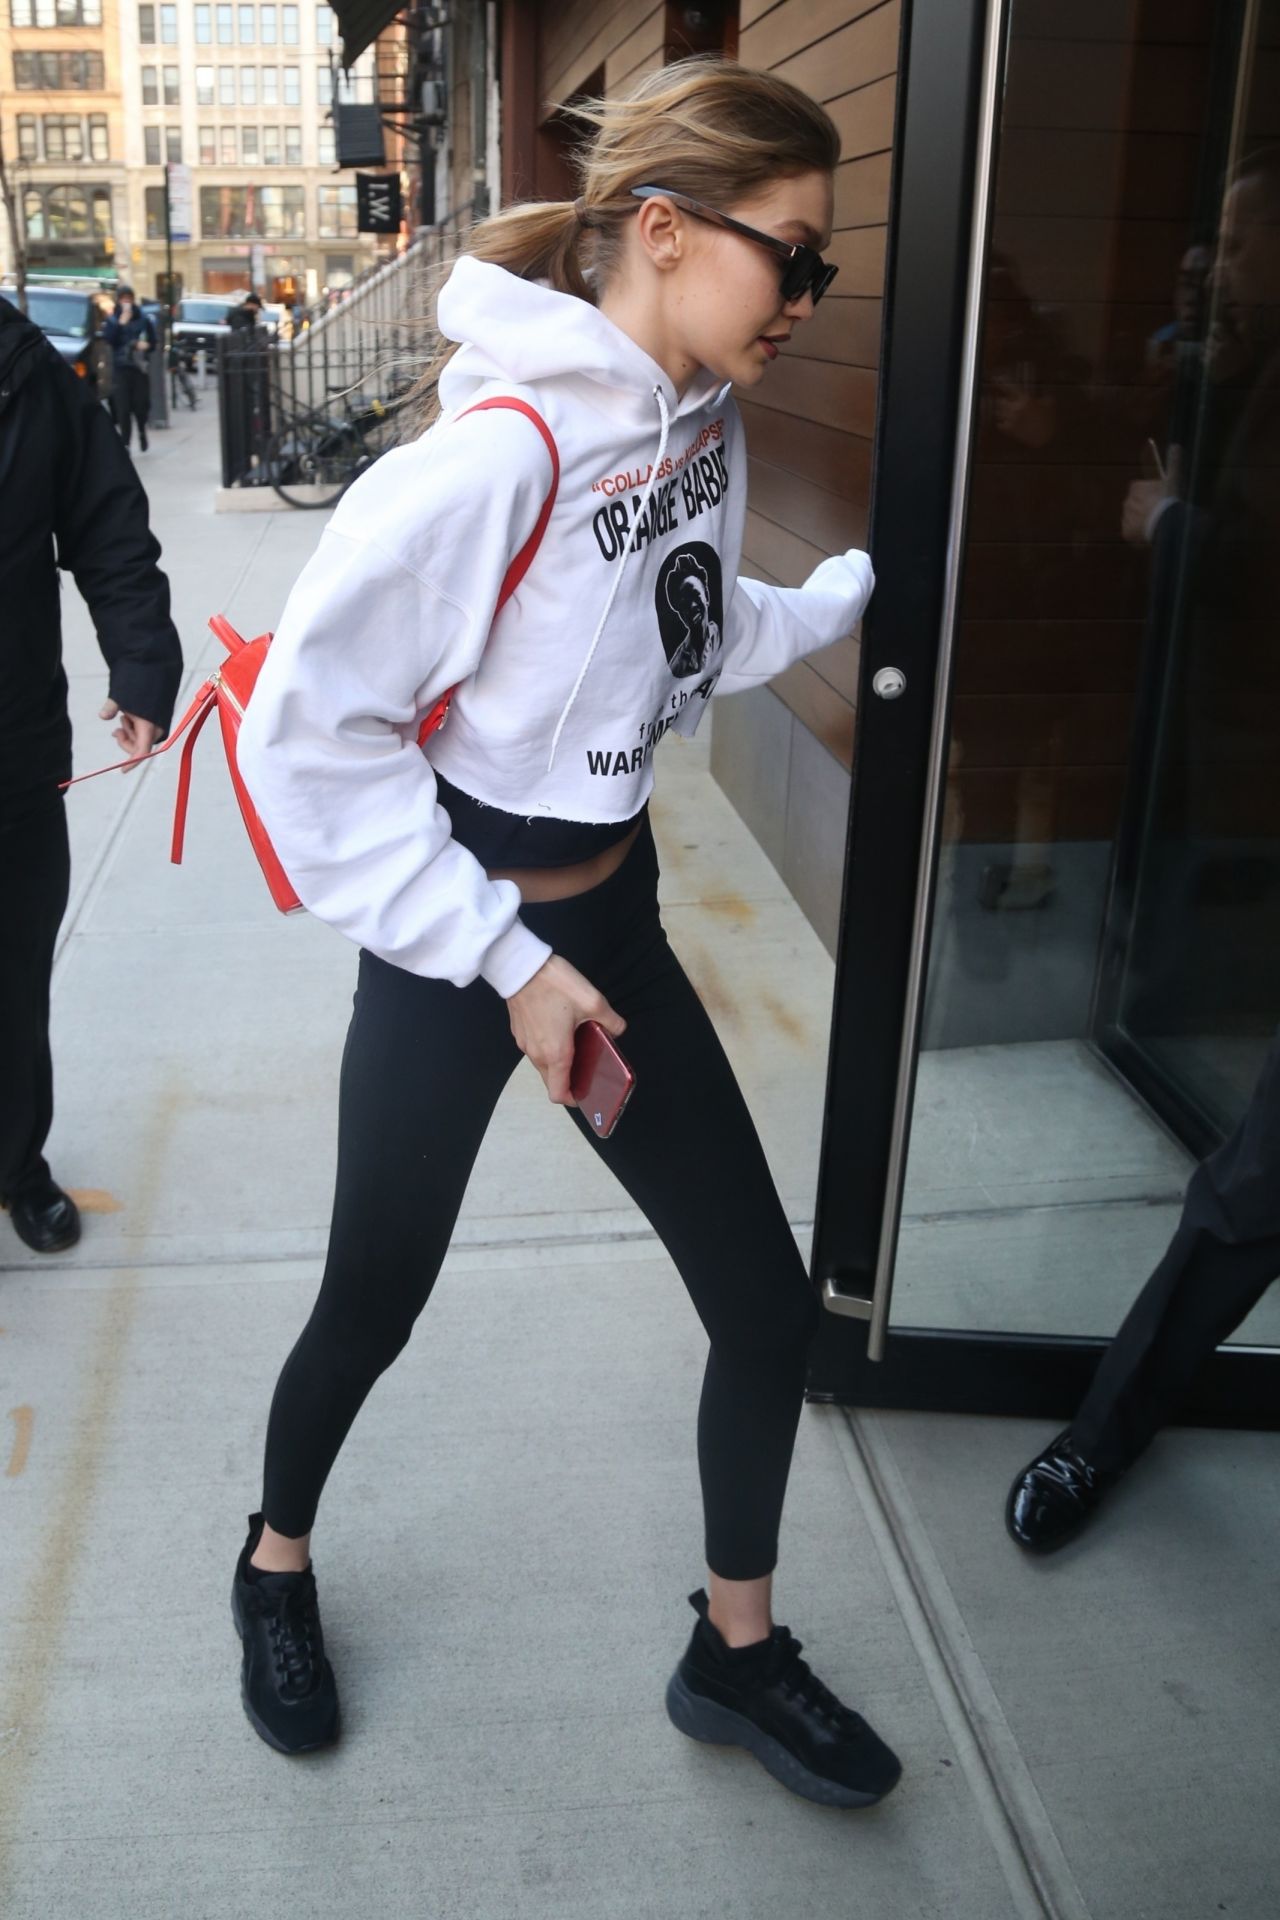 Linda Gaunt Communications - Gigi Hadid spotted in the Furla Candy Backpack  in NYC.